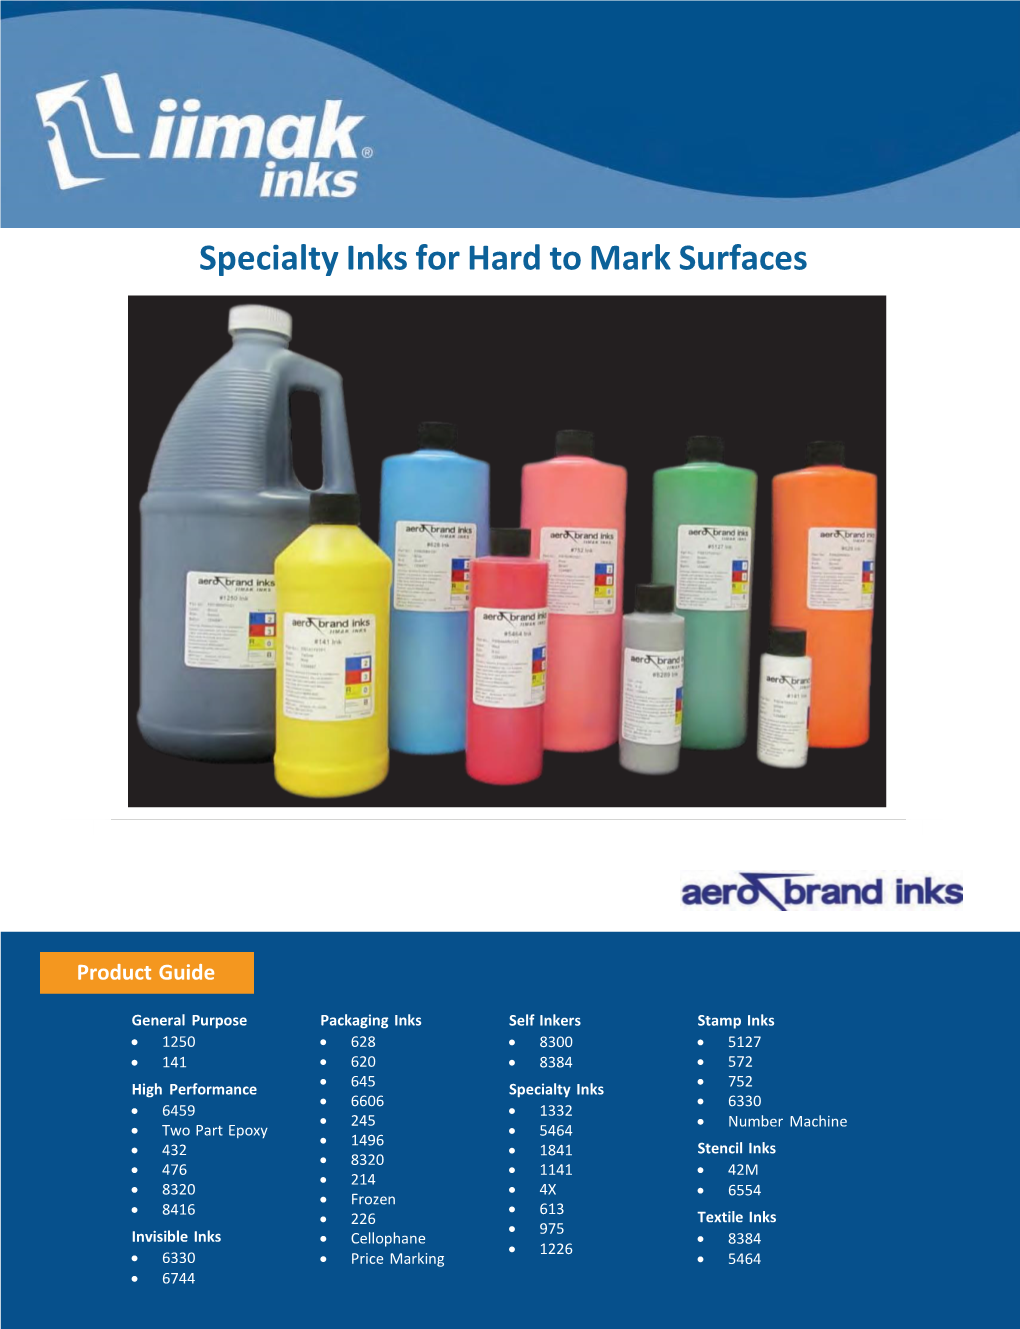 Specialty Inks for Hard to Mark Surfaces